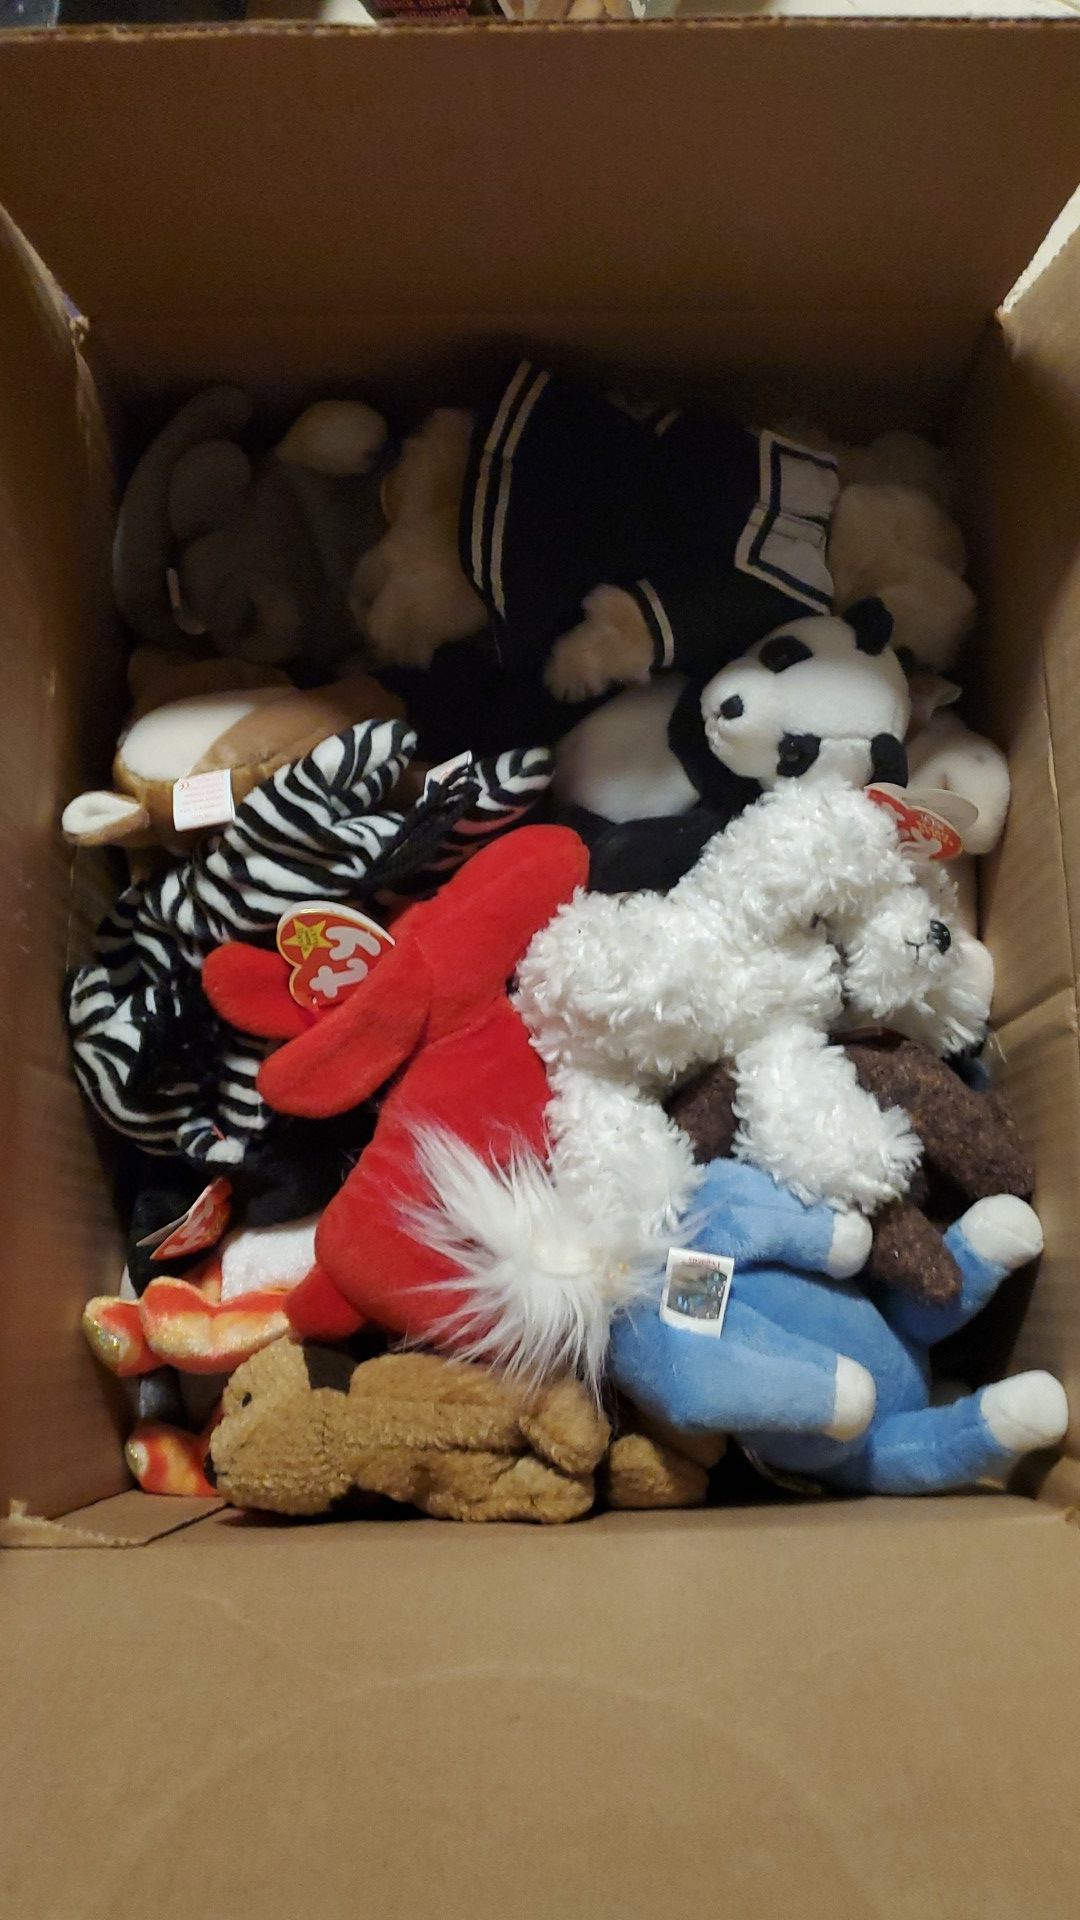 Full box of Beanie Babys. All with tags and clean